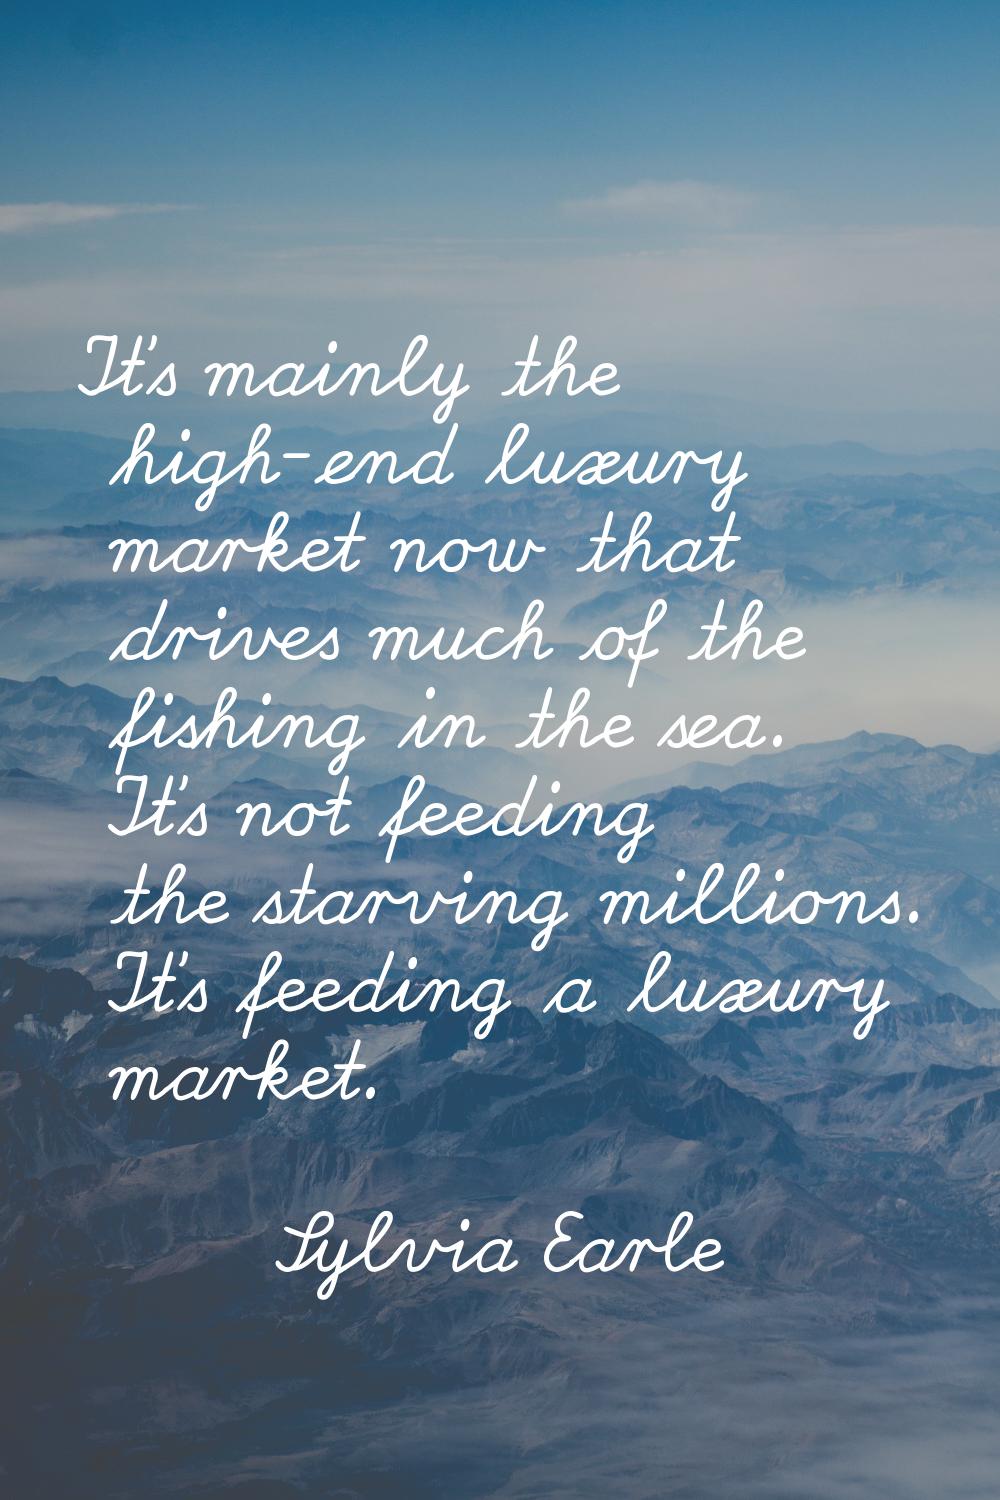 It's mainly the high-end luxury market now that drives much of the fishing in the sea. It's not fee